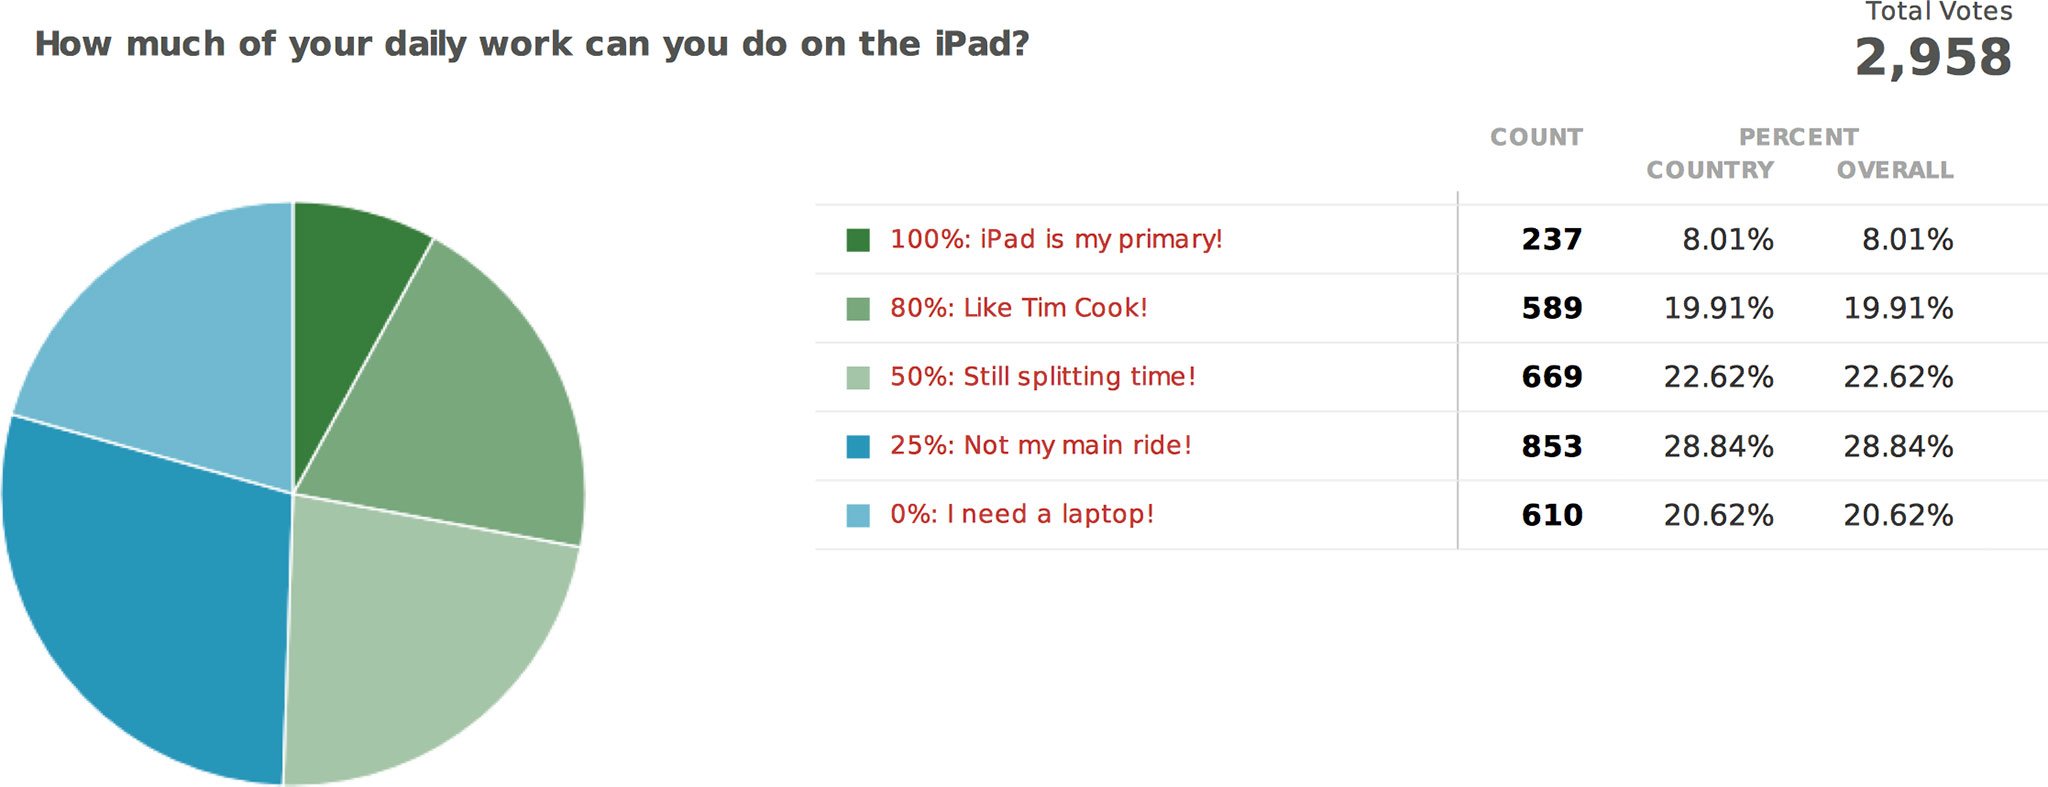 8% can do 100% of their work with their iPad, 20% can do 80%, 23% can do 50%, 29% can do 25%, and 21% can't do any.